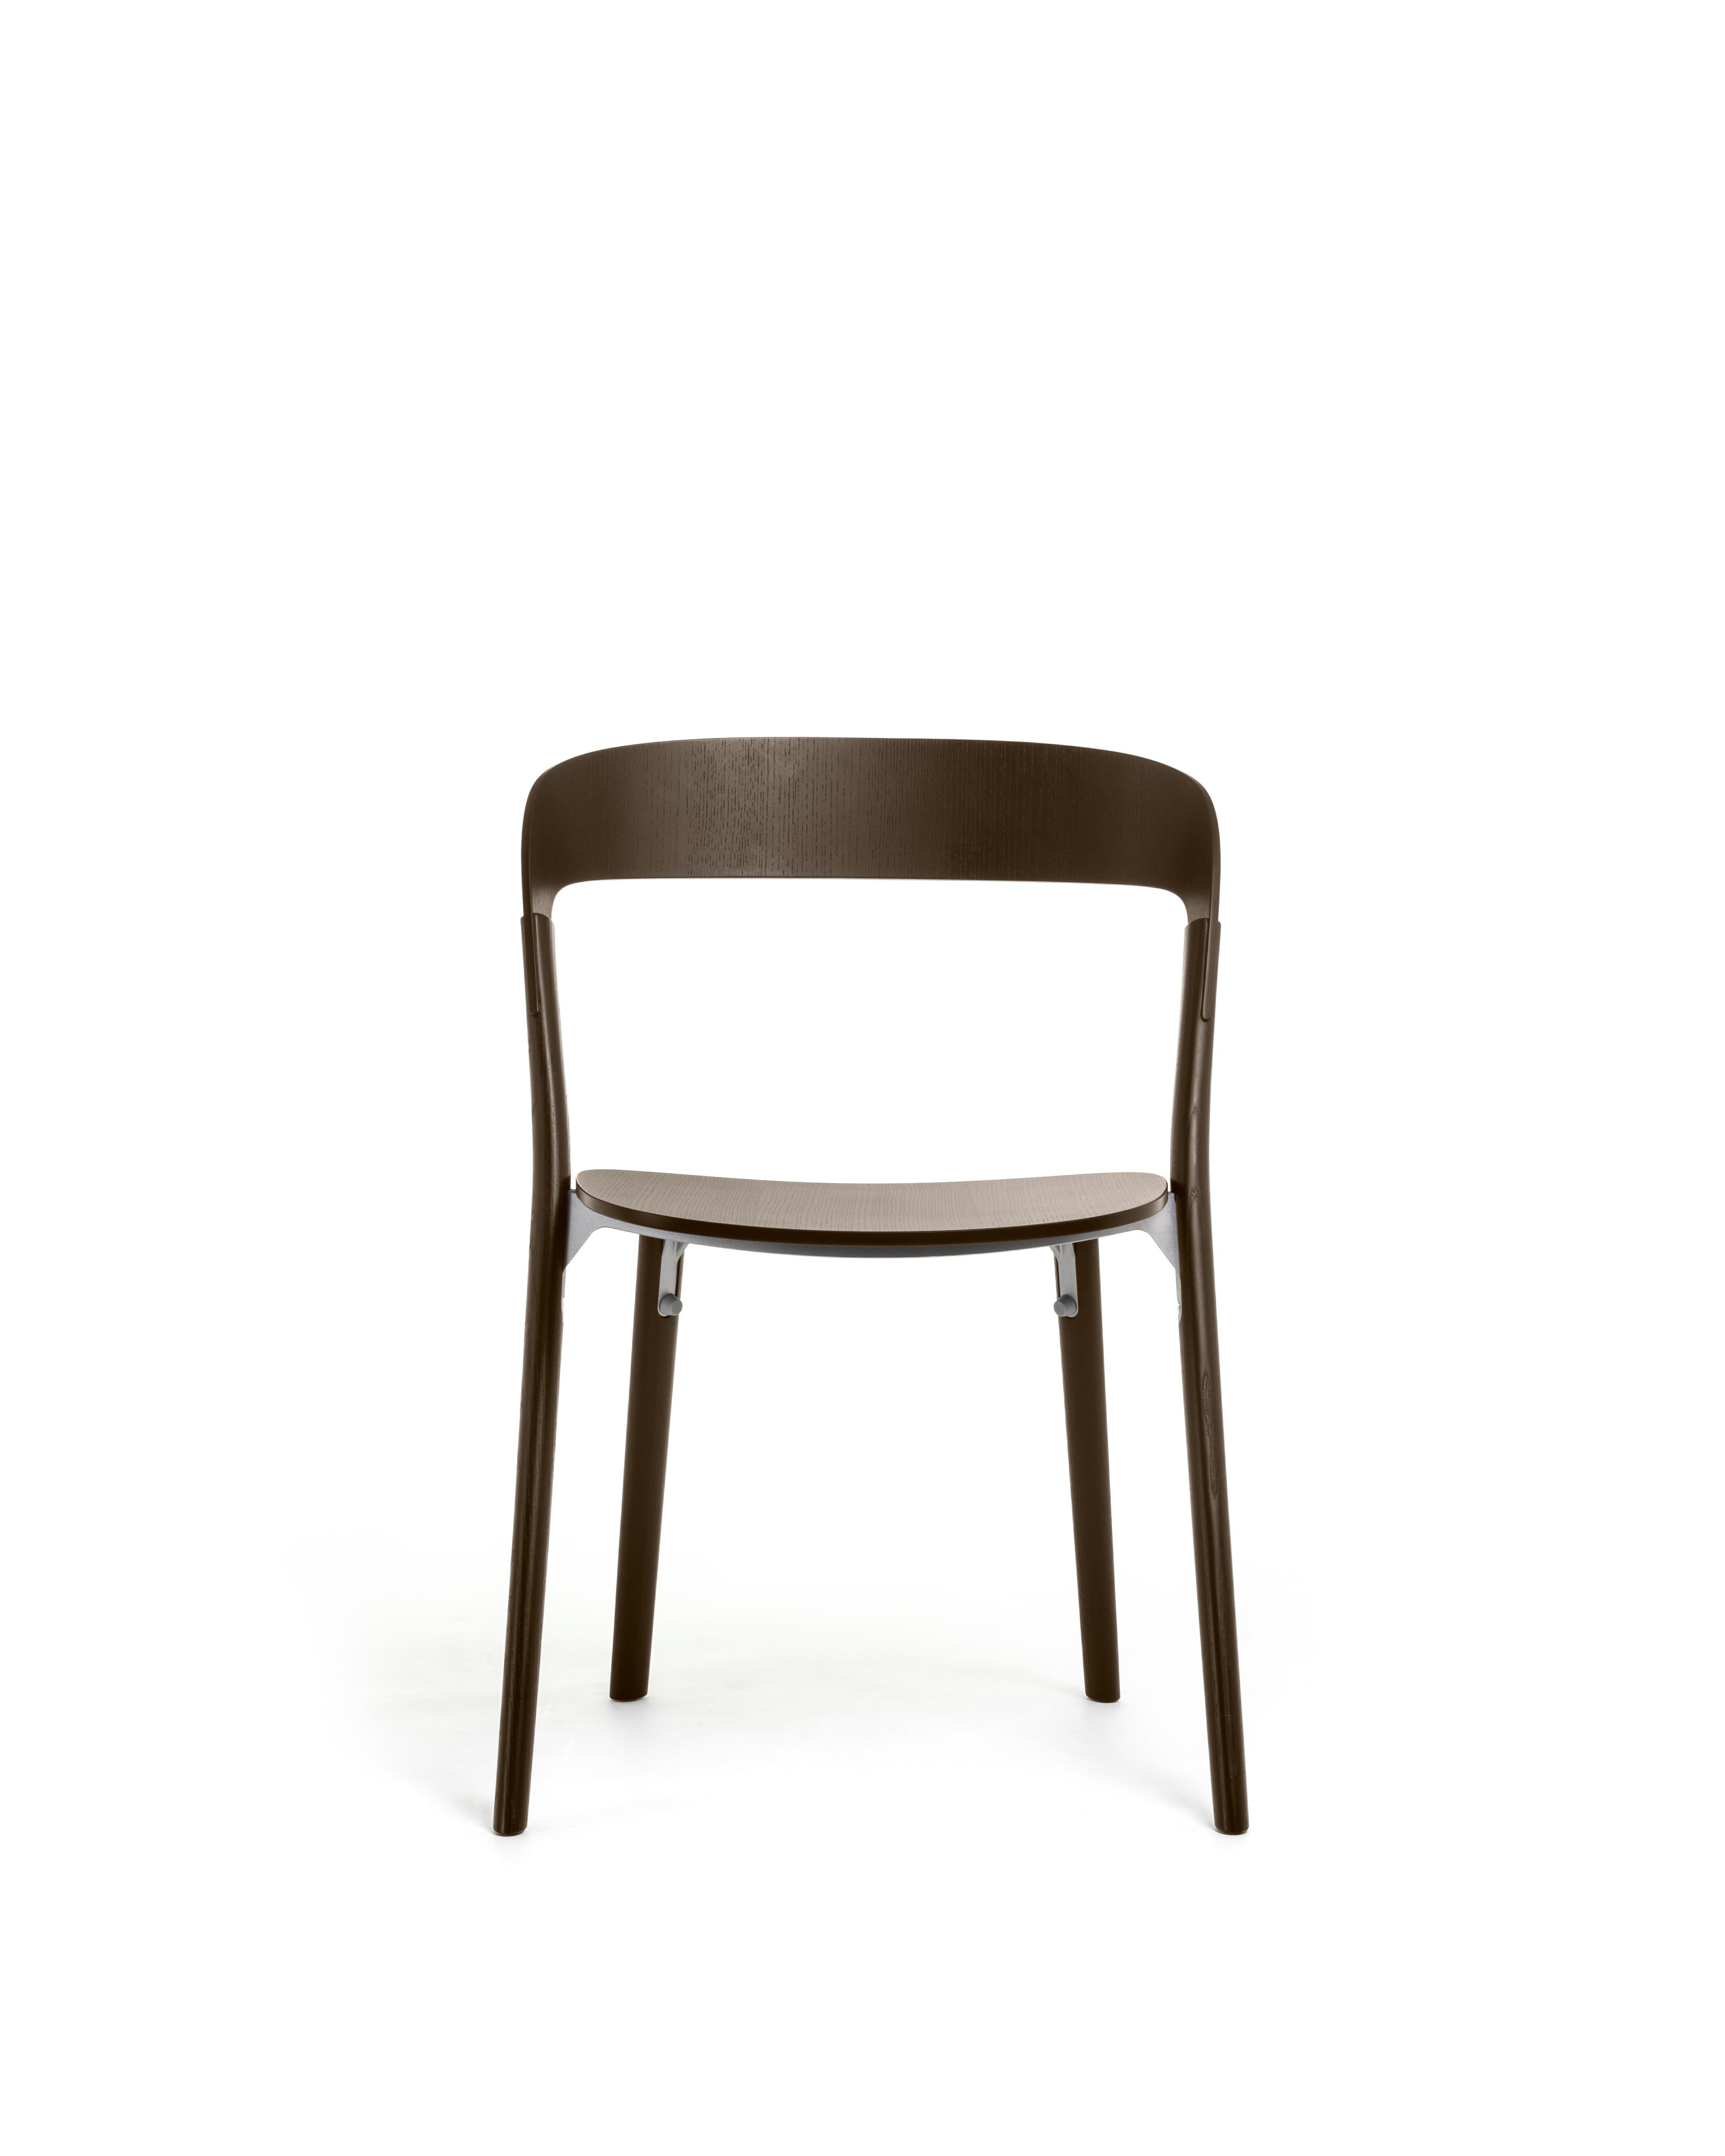 Italian Set of 2 Pila Stacking Chair by Ronan & Erwan Boroullec for MAGIS For Sale